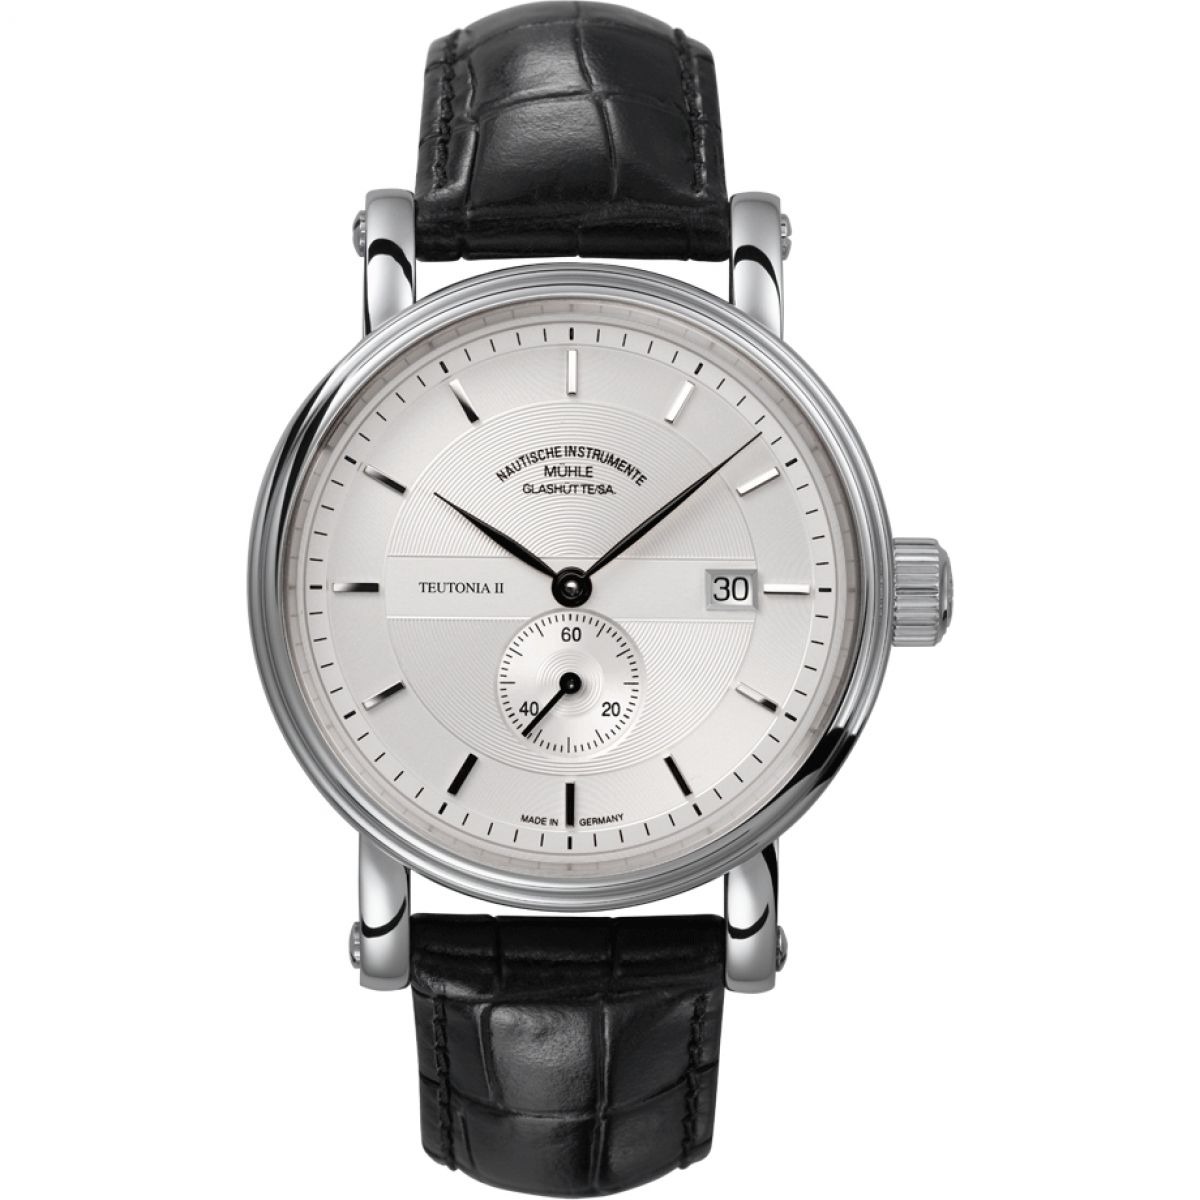 Watch Shop - Gents Watch in Silver from Muhle Glashutte GOOFASH